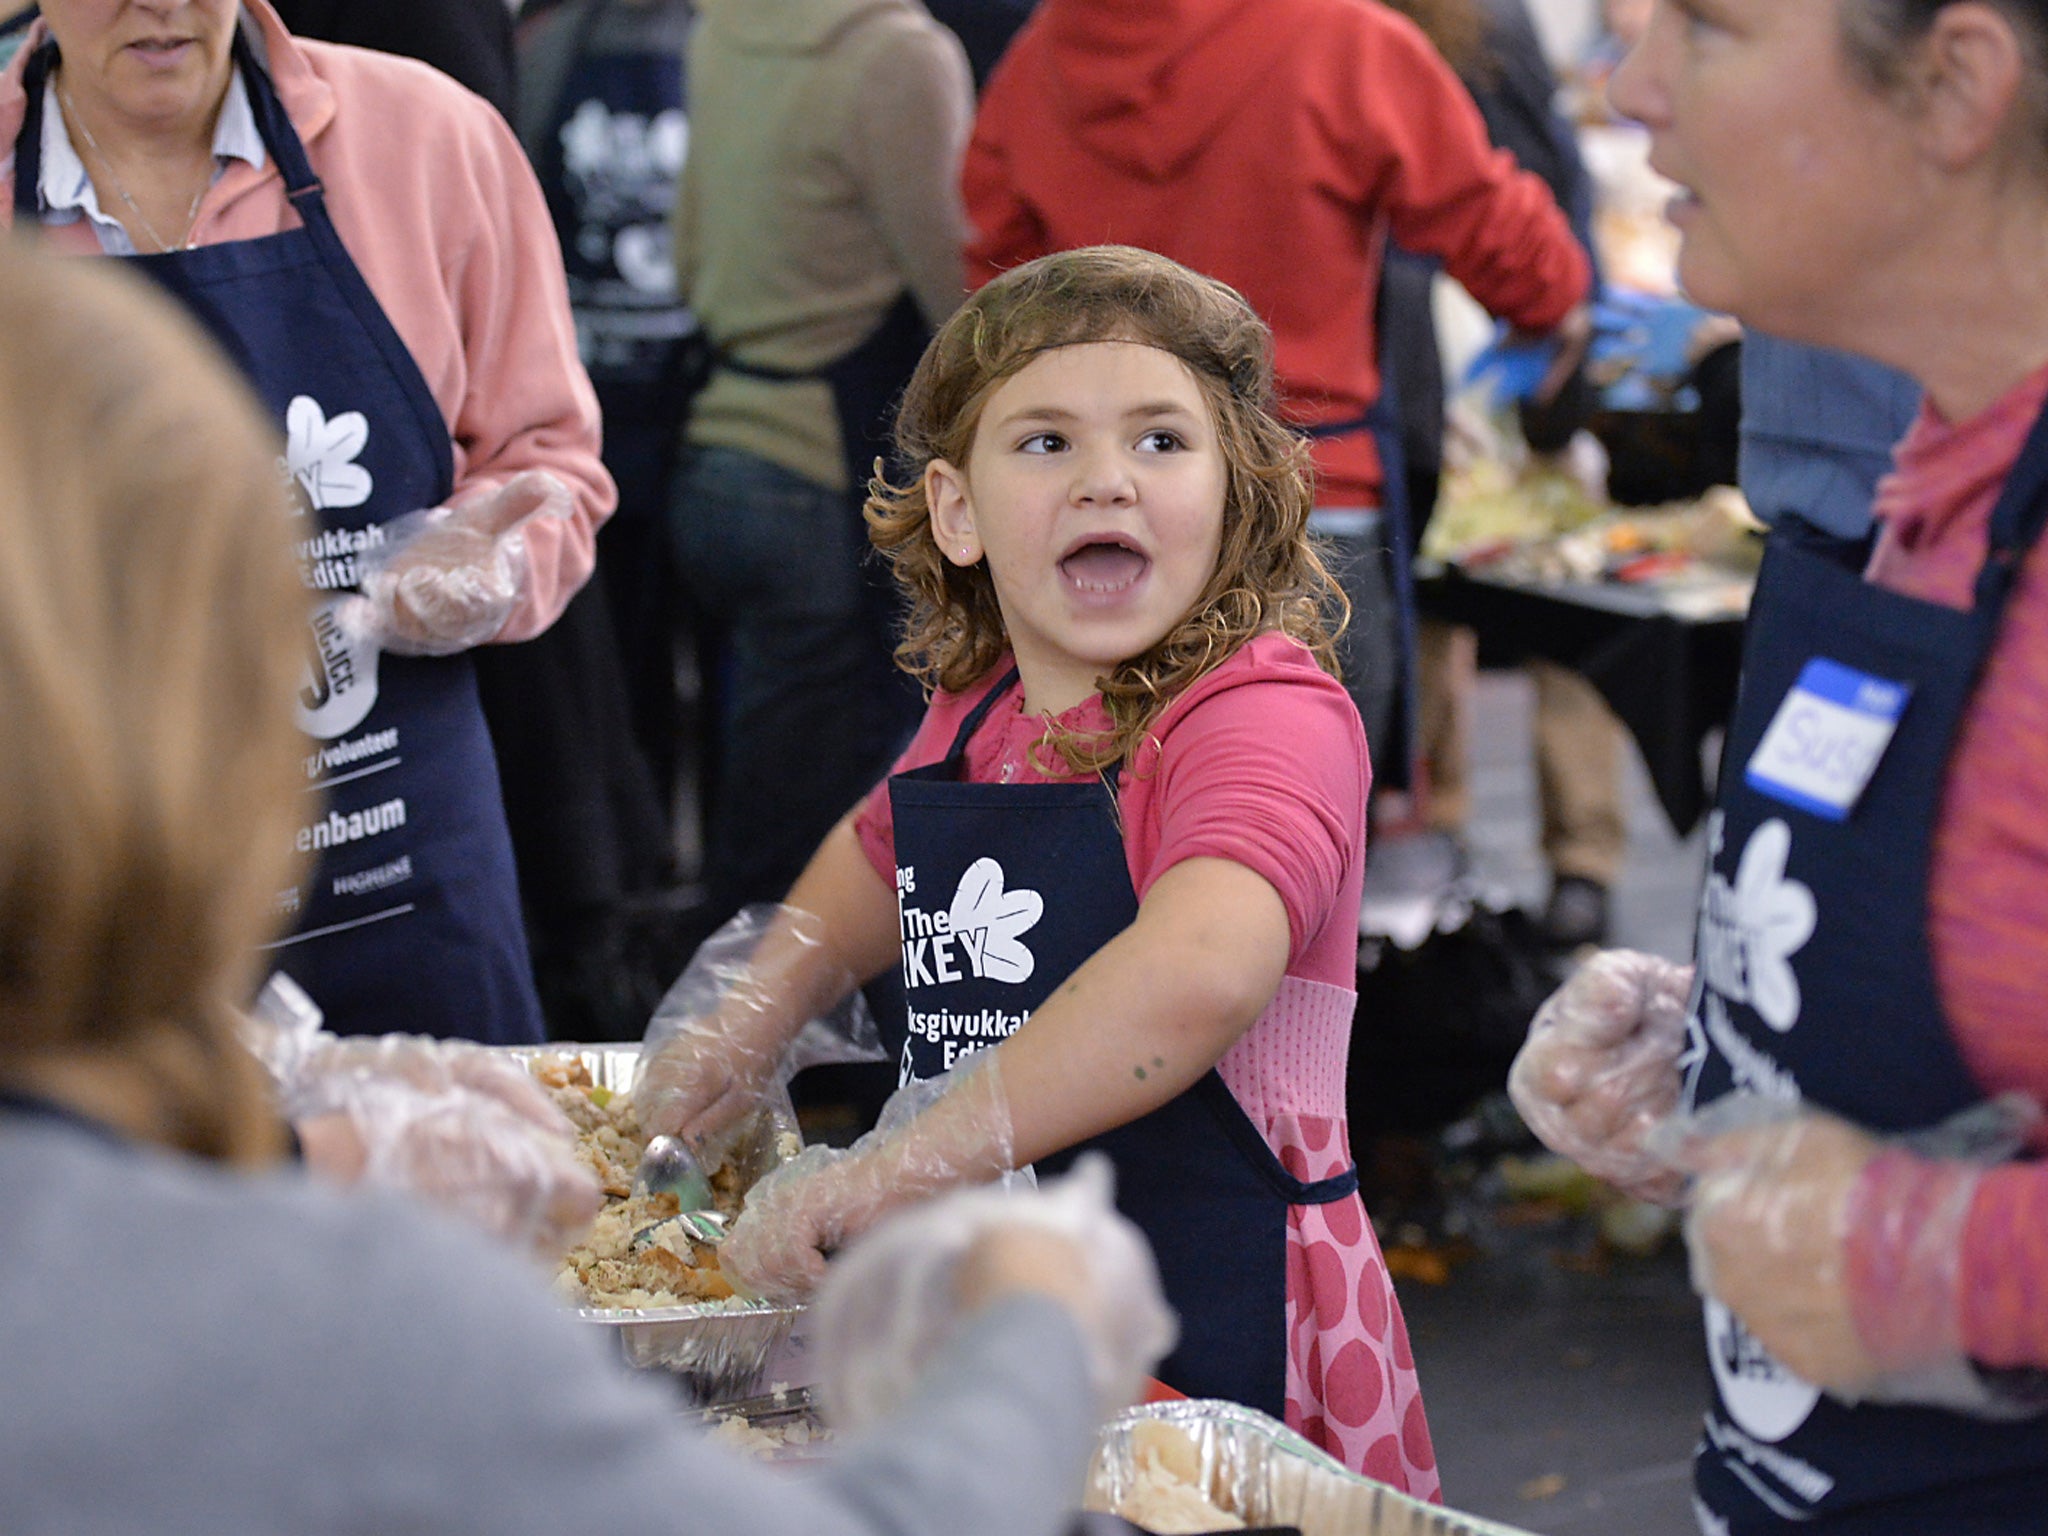 People prepare Thanksgiving meals for those in need at the District of Columbia Jewish Community Center in Washington as America prepares to celebrate Thanksgiving in its rare overlap with the Jewish holiday of Hanukkah, prompting the center to dub it 'Th